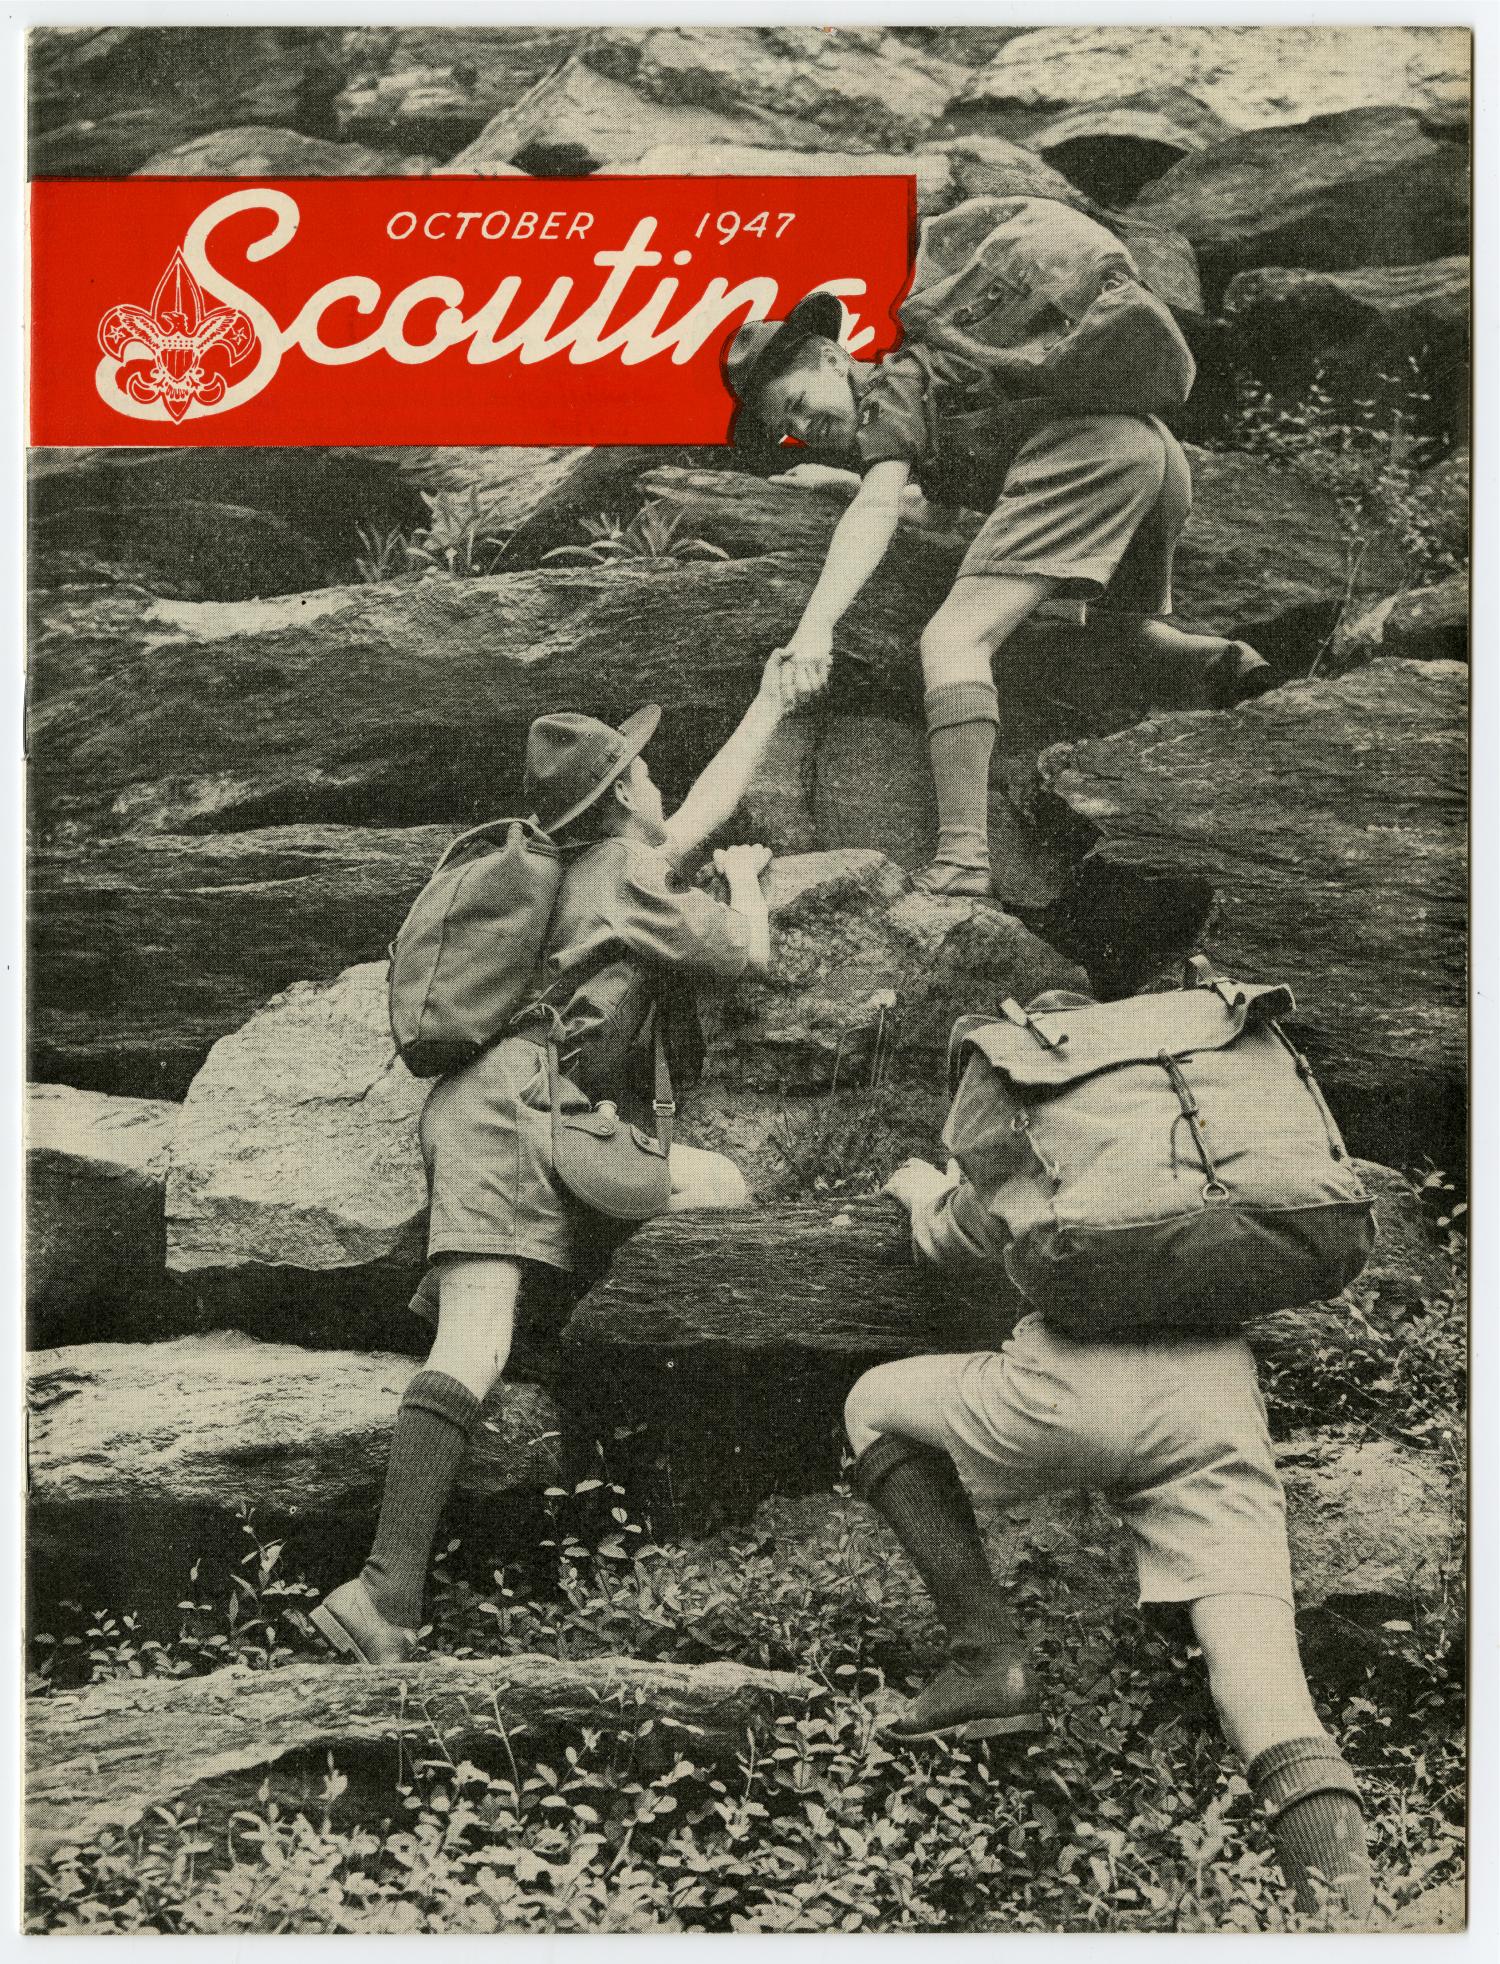 Scouting, Volume 35, Number 8, October 1947
                                                
                                                    Front Cover
                                                